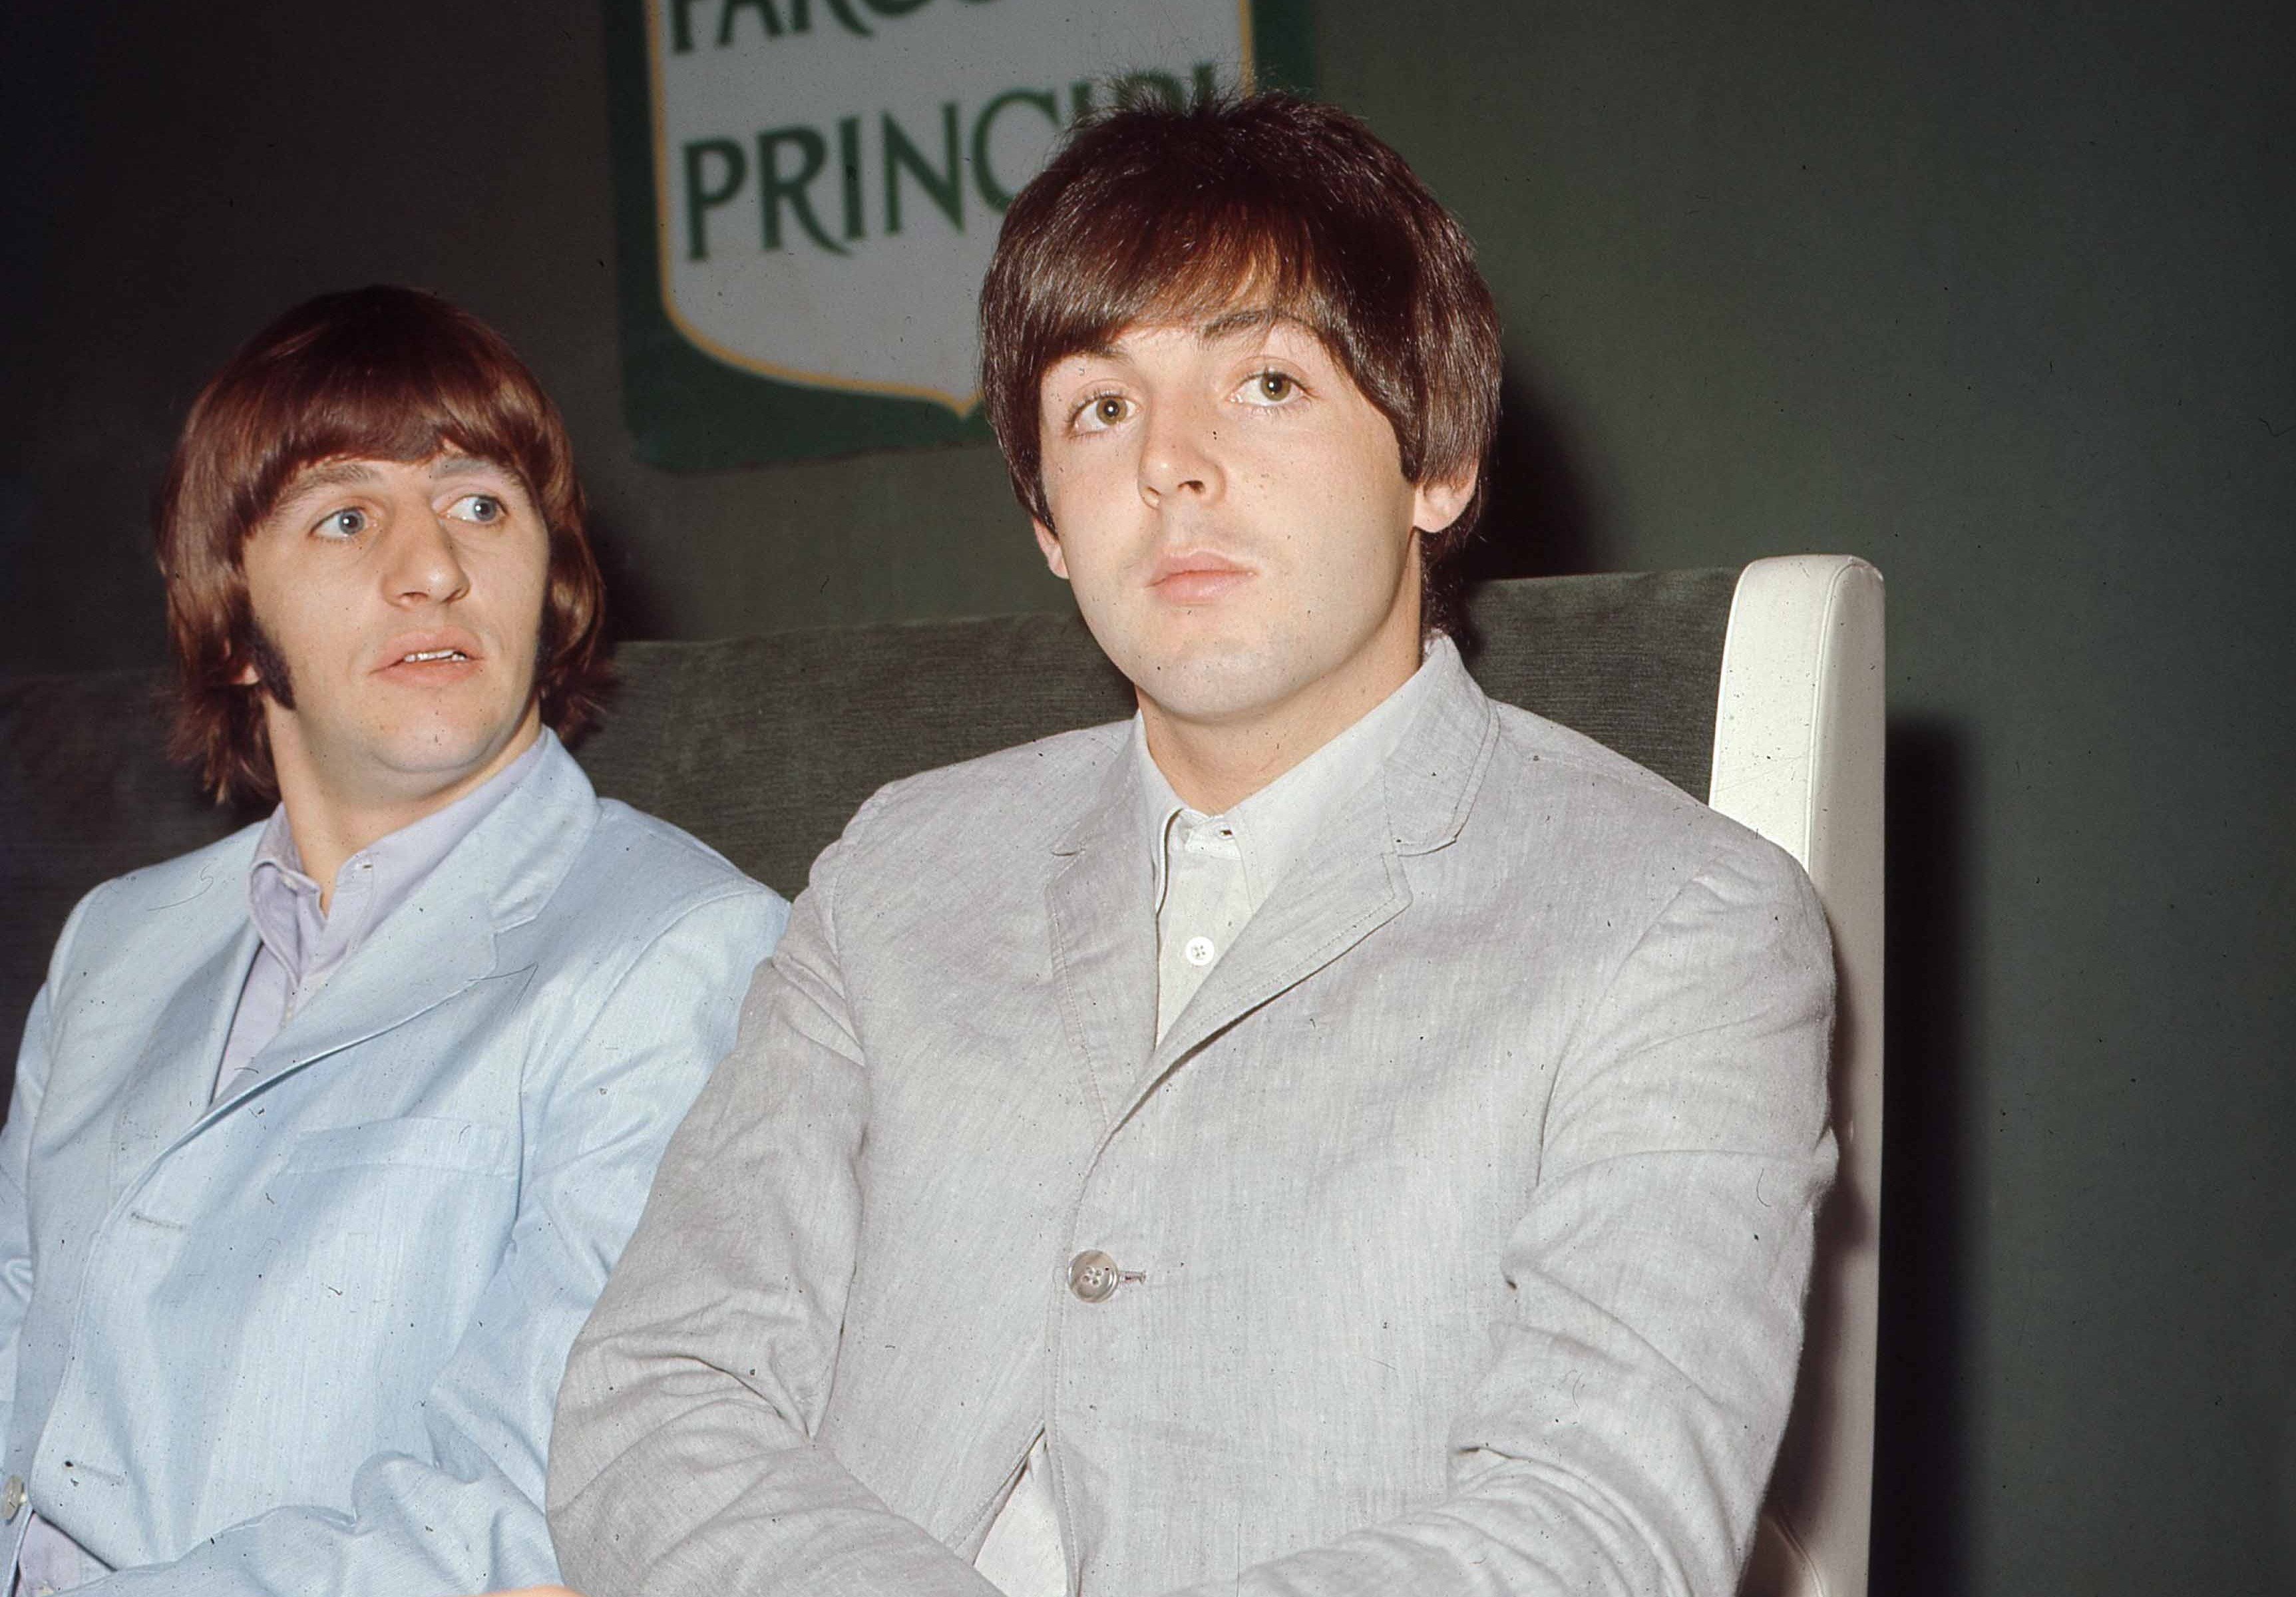 Ringo Starr and Paul McCartney sit at a table together.